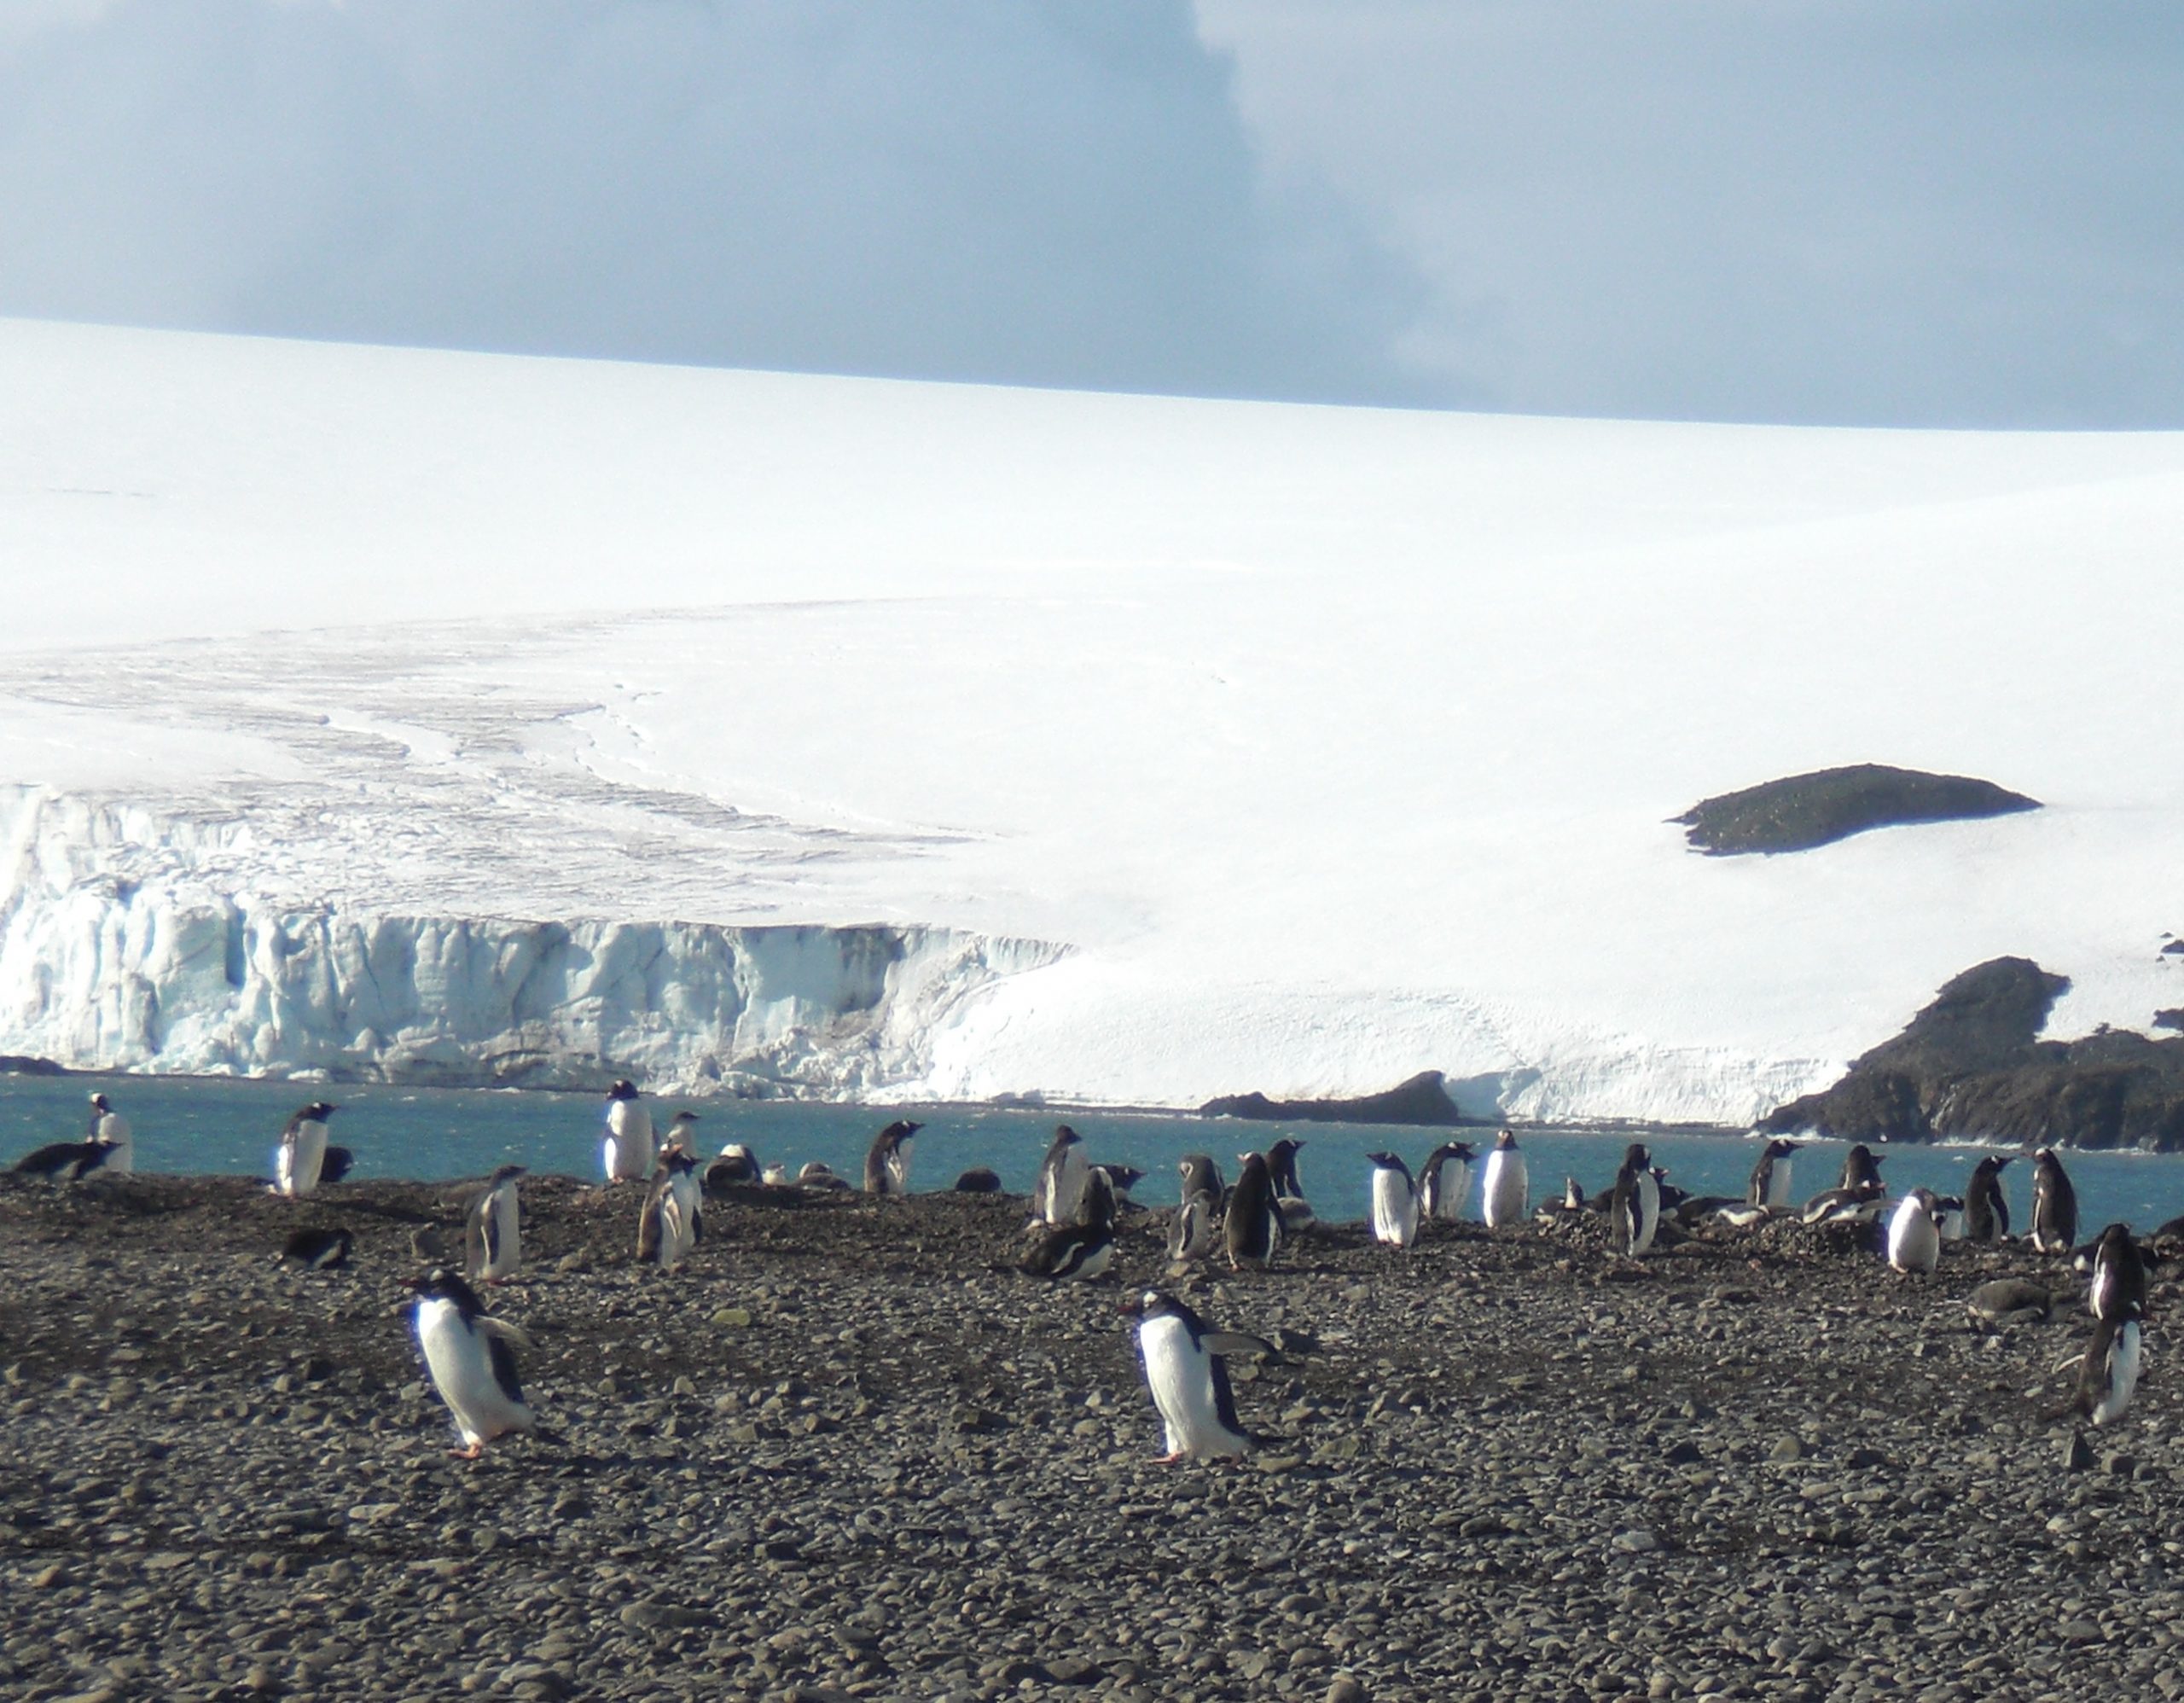 I have been to the very bottom of our planet – ANTARCTICA